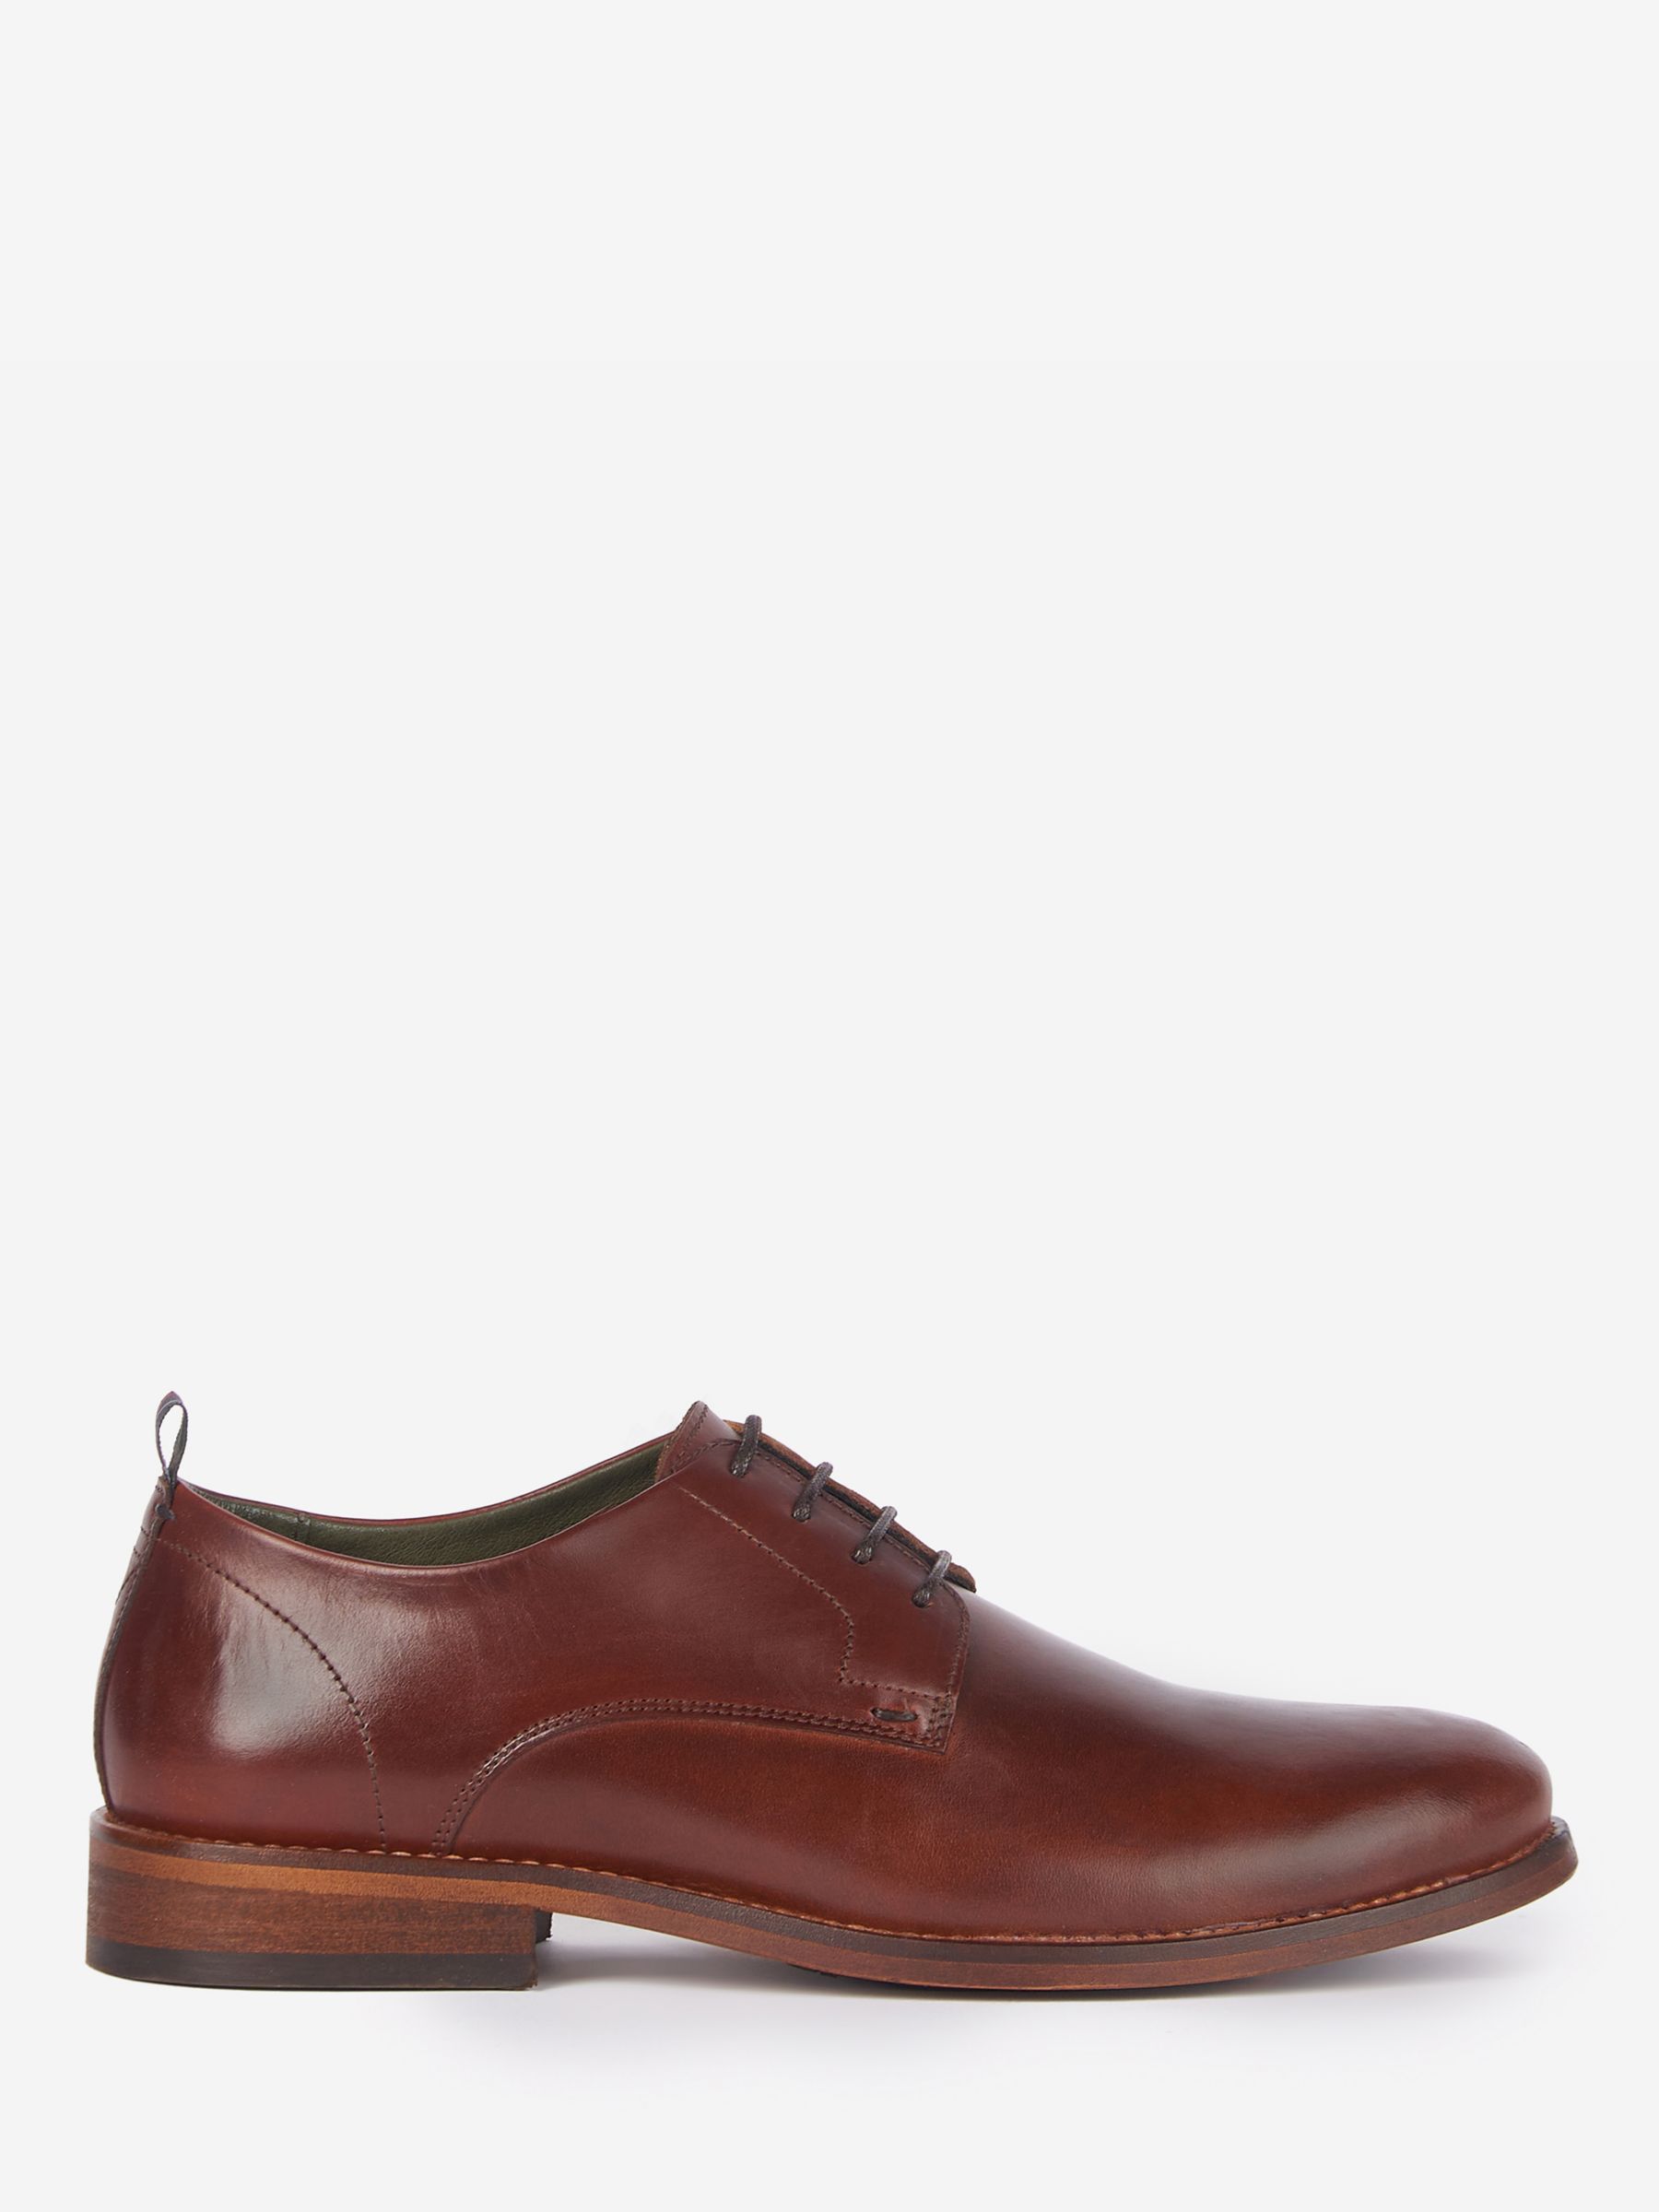 Barbour Harrowden Leather Derby Shoes, Mahogany